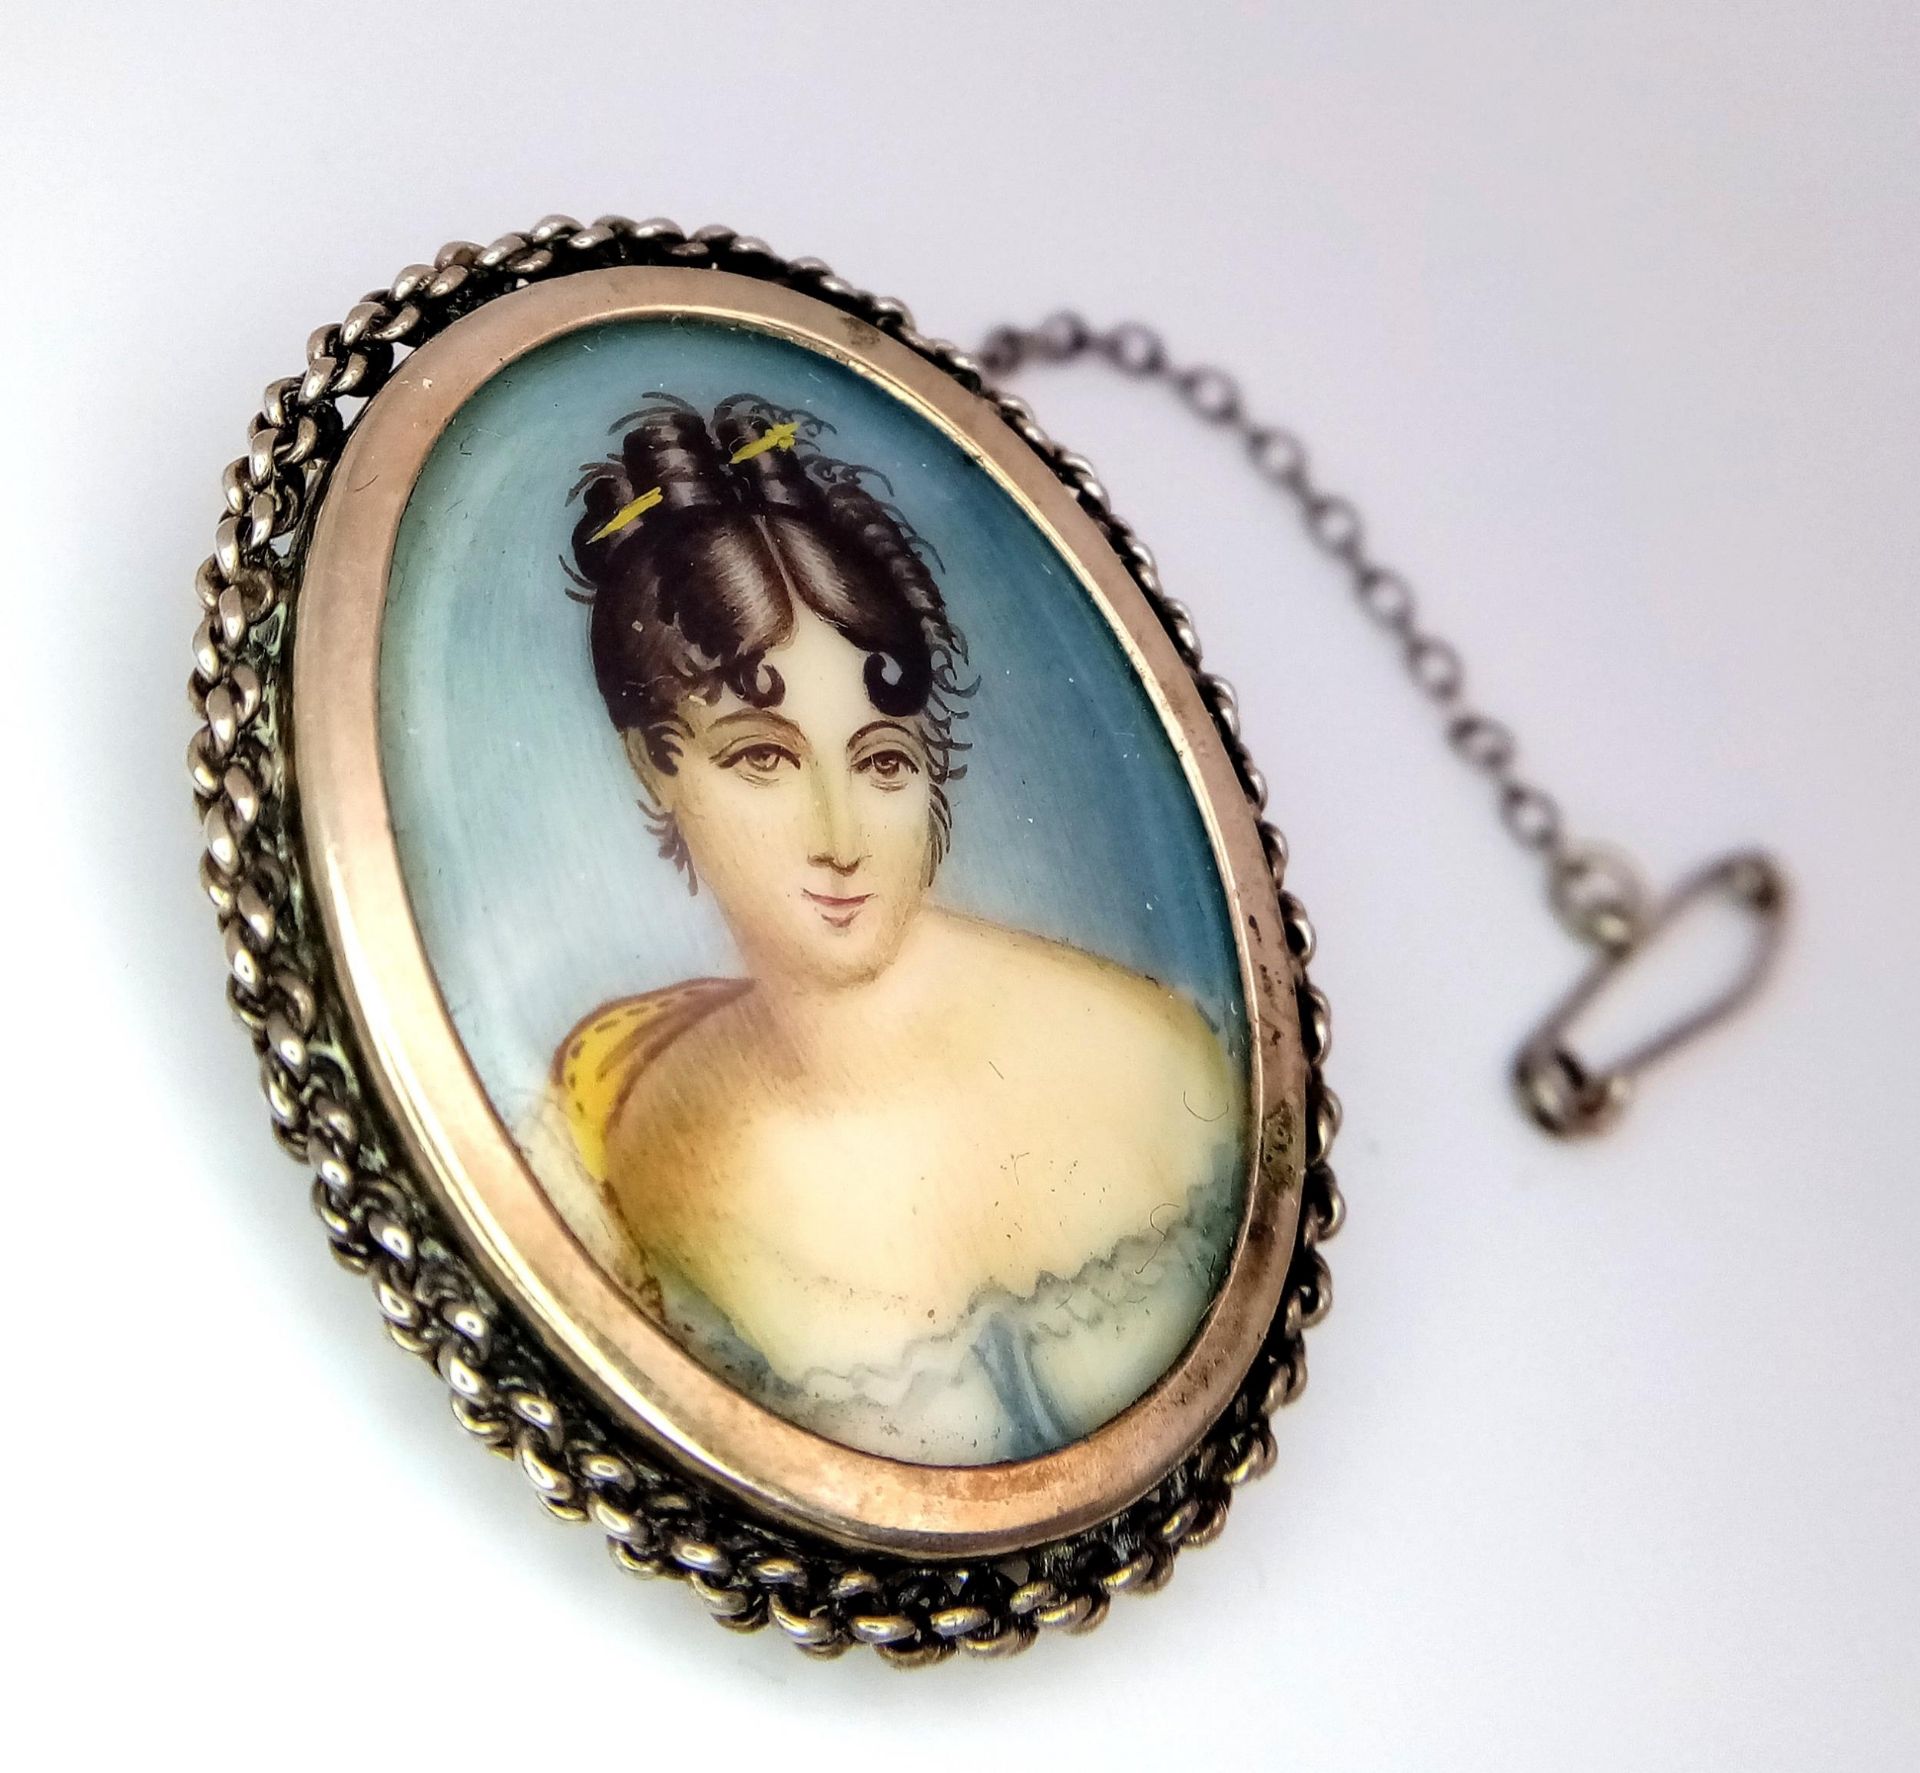 An Exquisite, Vintage/Antique, Silver Mounted Hand Painted Miniature Portrait Brooch. 800